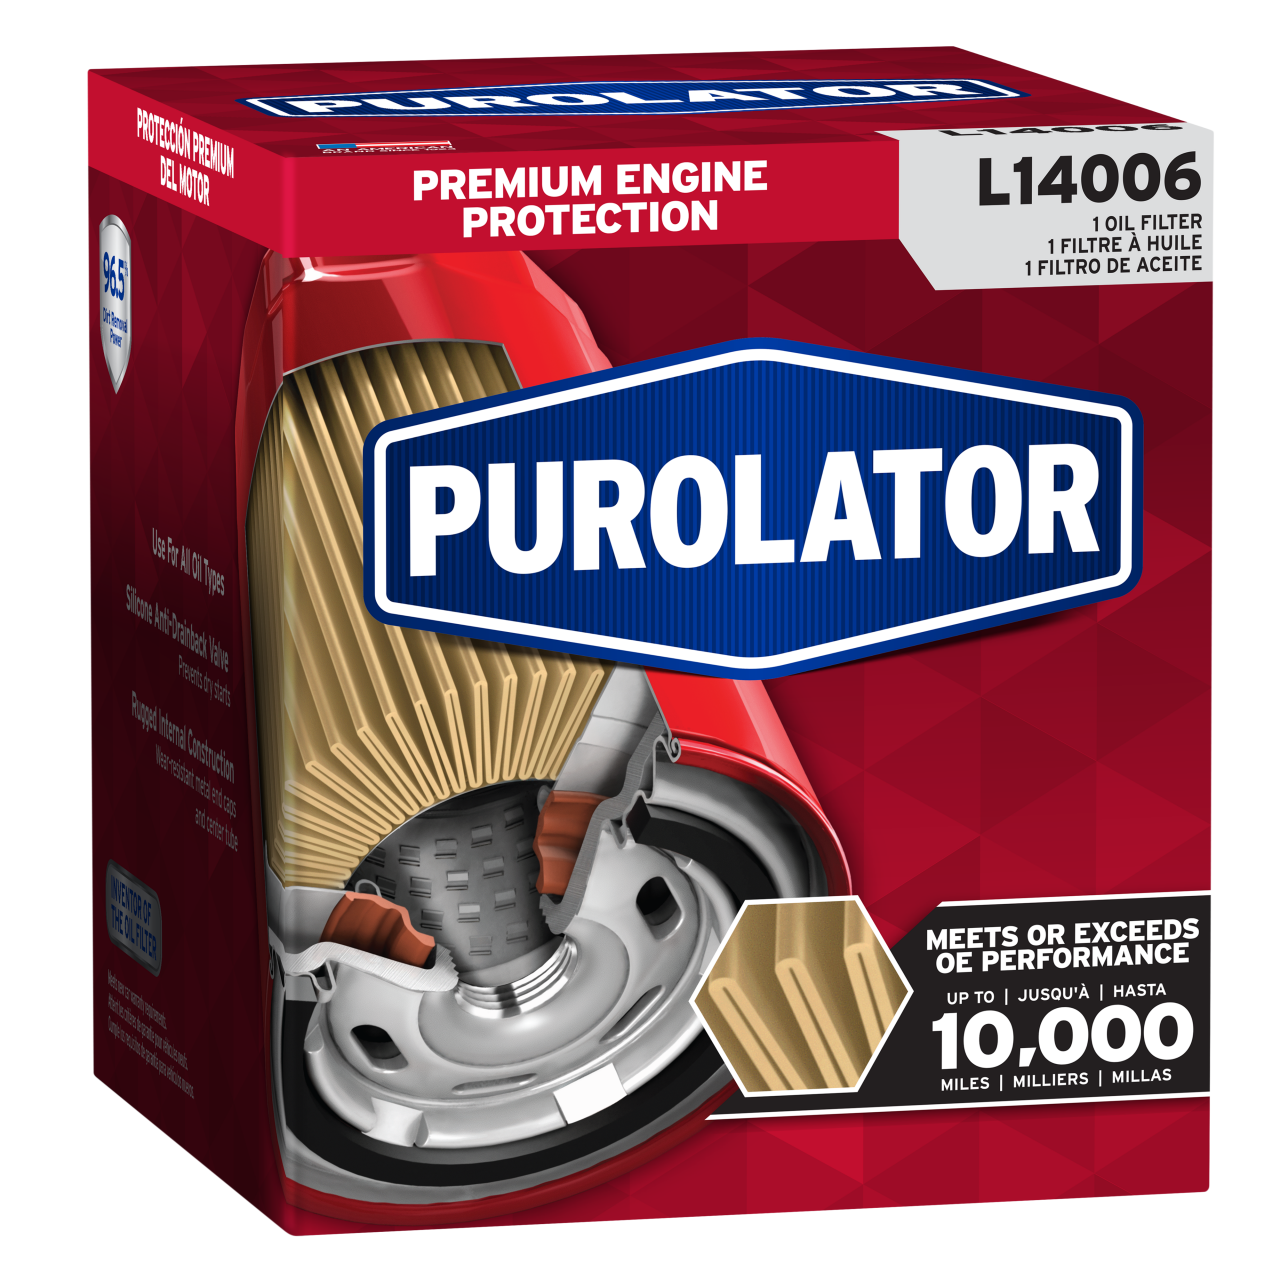 Ideal for normal driving conditions, the classic line of Purolator Oil Filters continue to be trusted as a top-rated oil filter for engine protection.